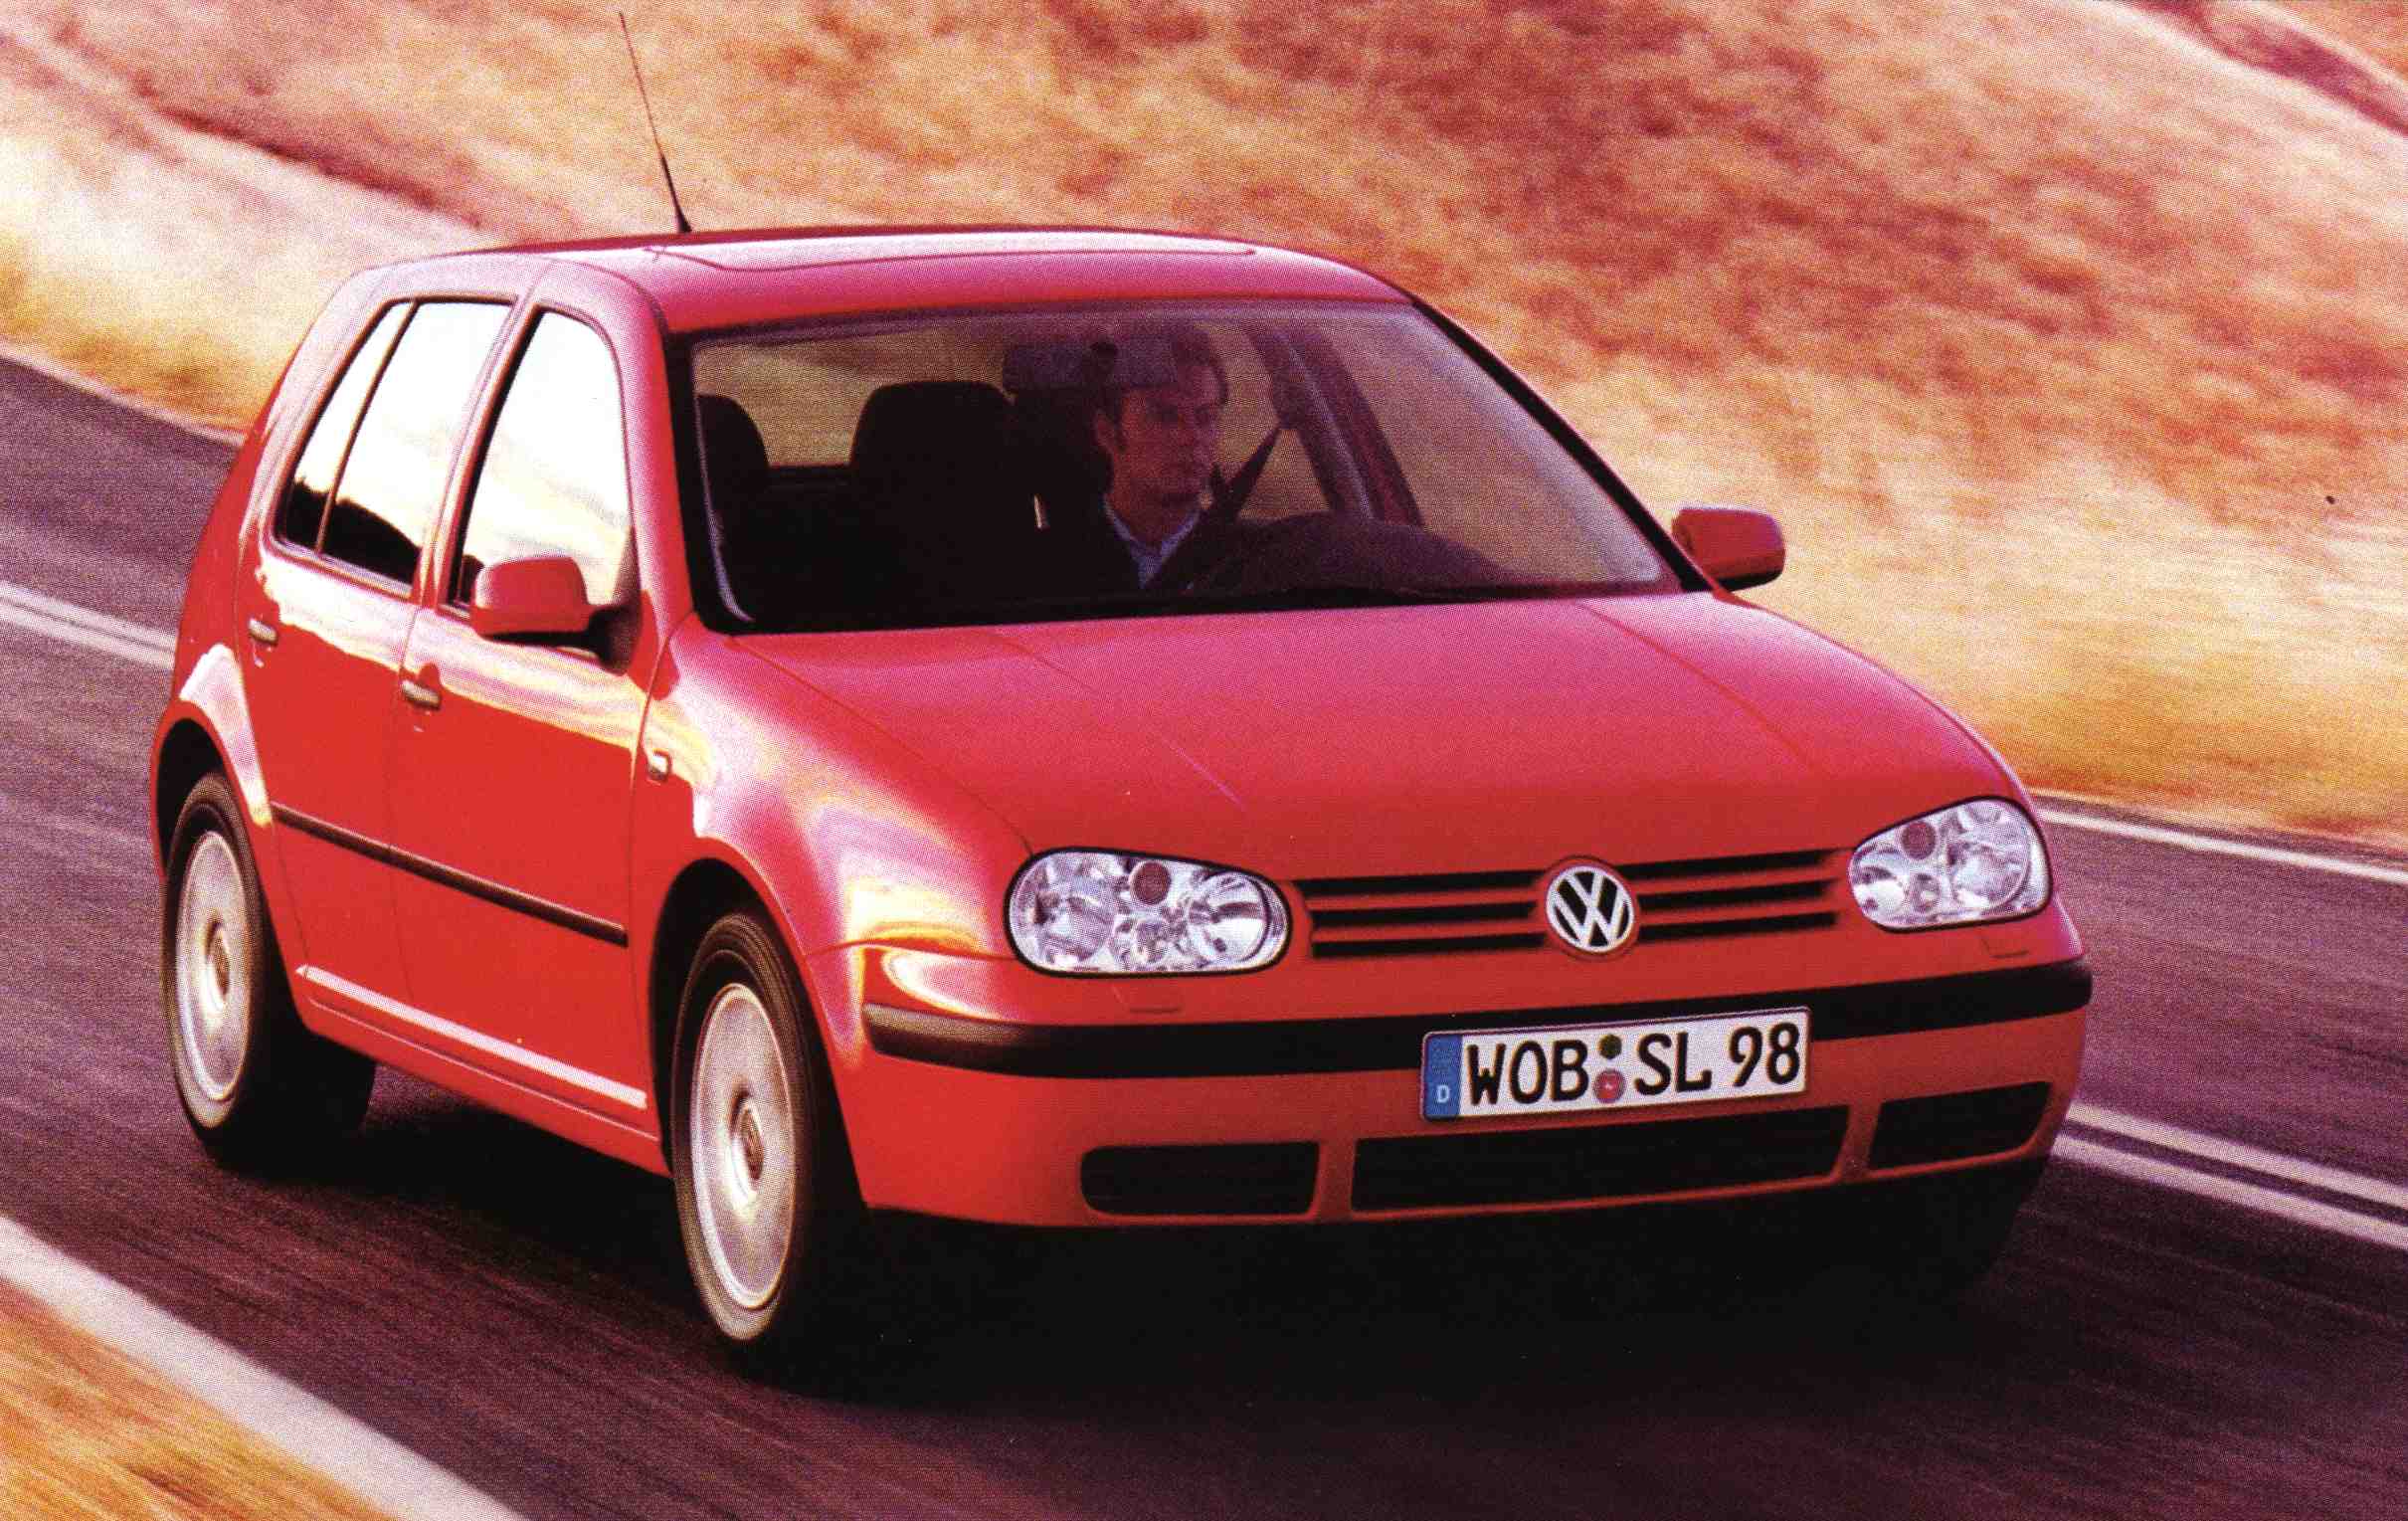 Volkswagen Gol Station 18. View Download Wallpaper. 2421x1529. Comments